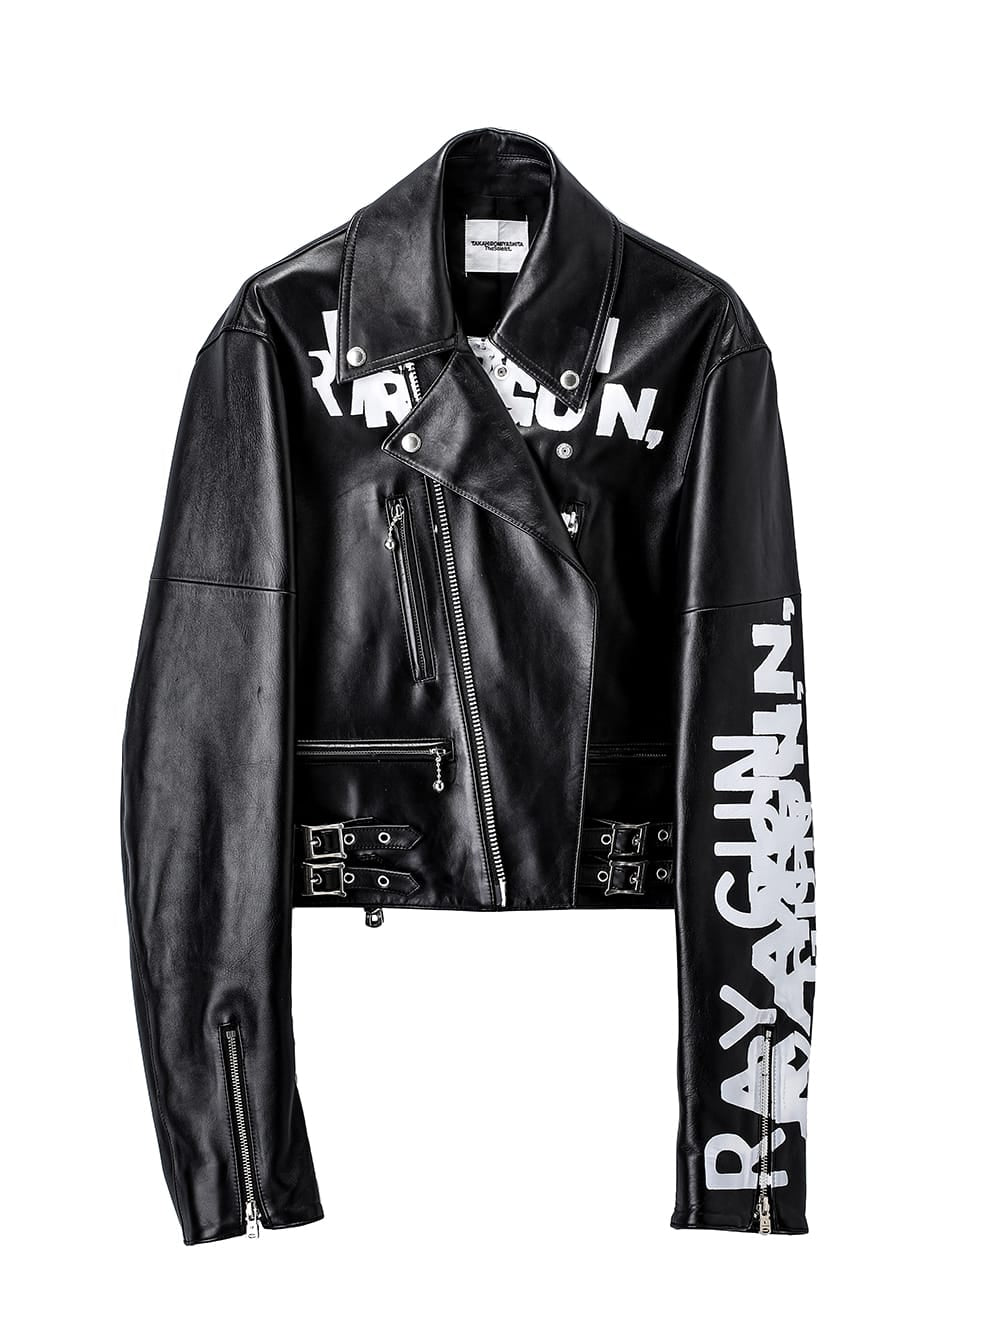 two-way cropped rider's jacket.